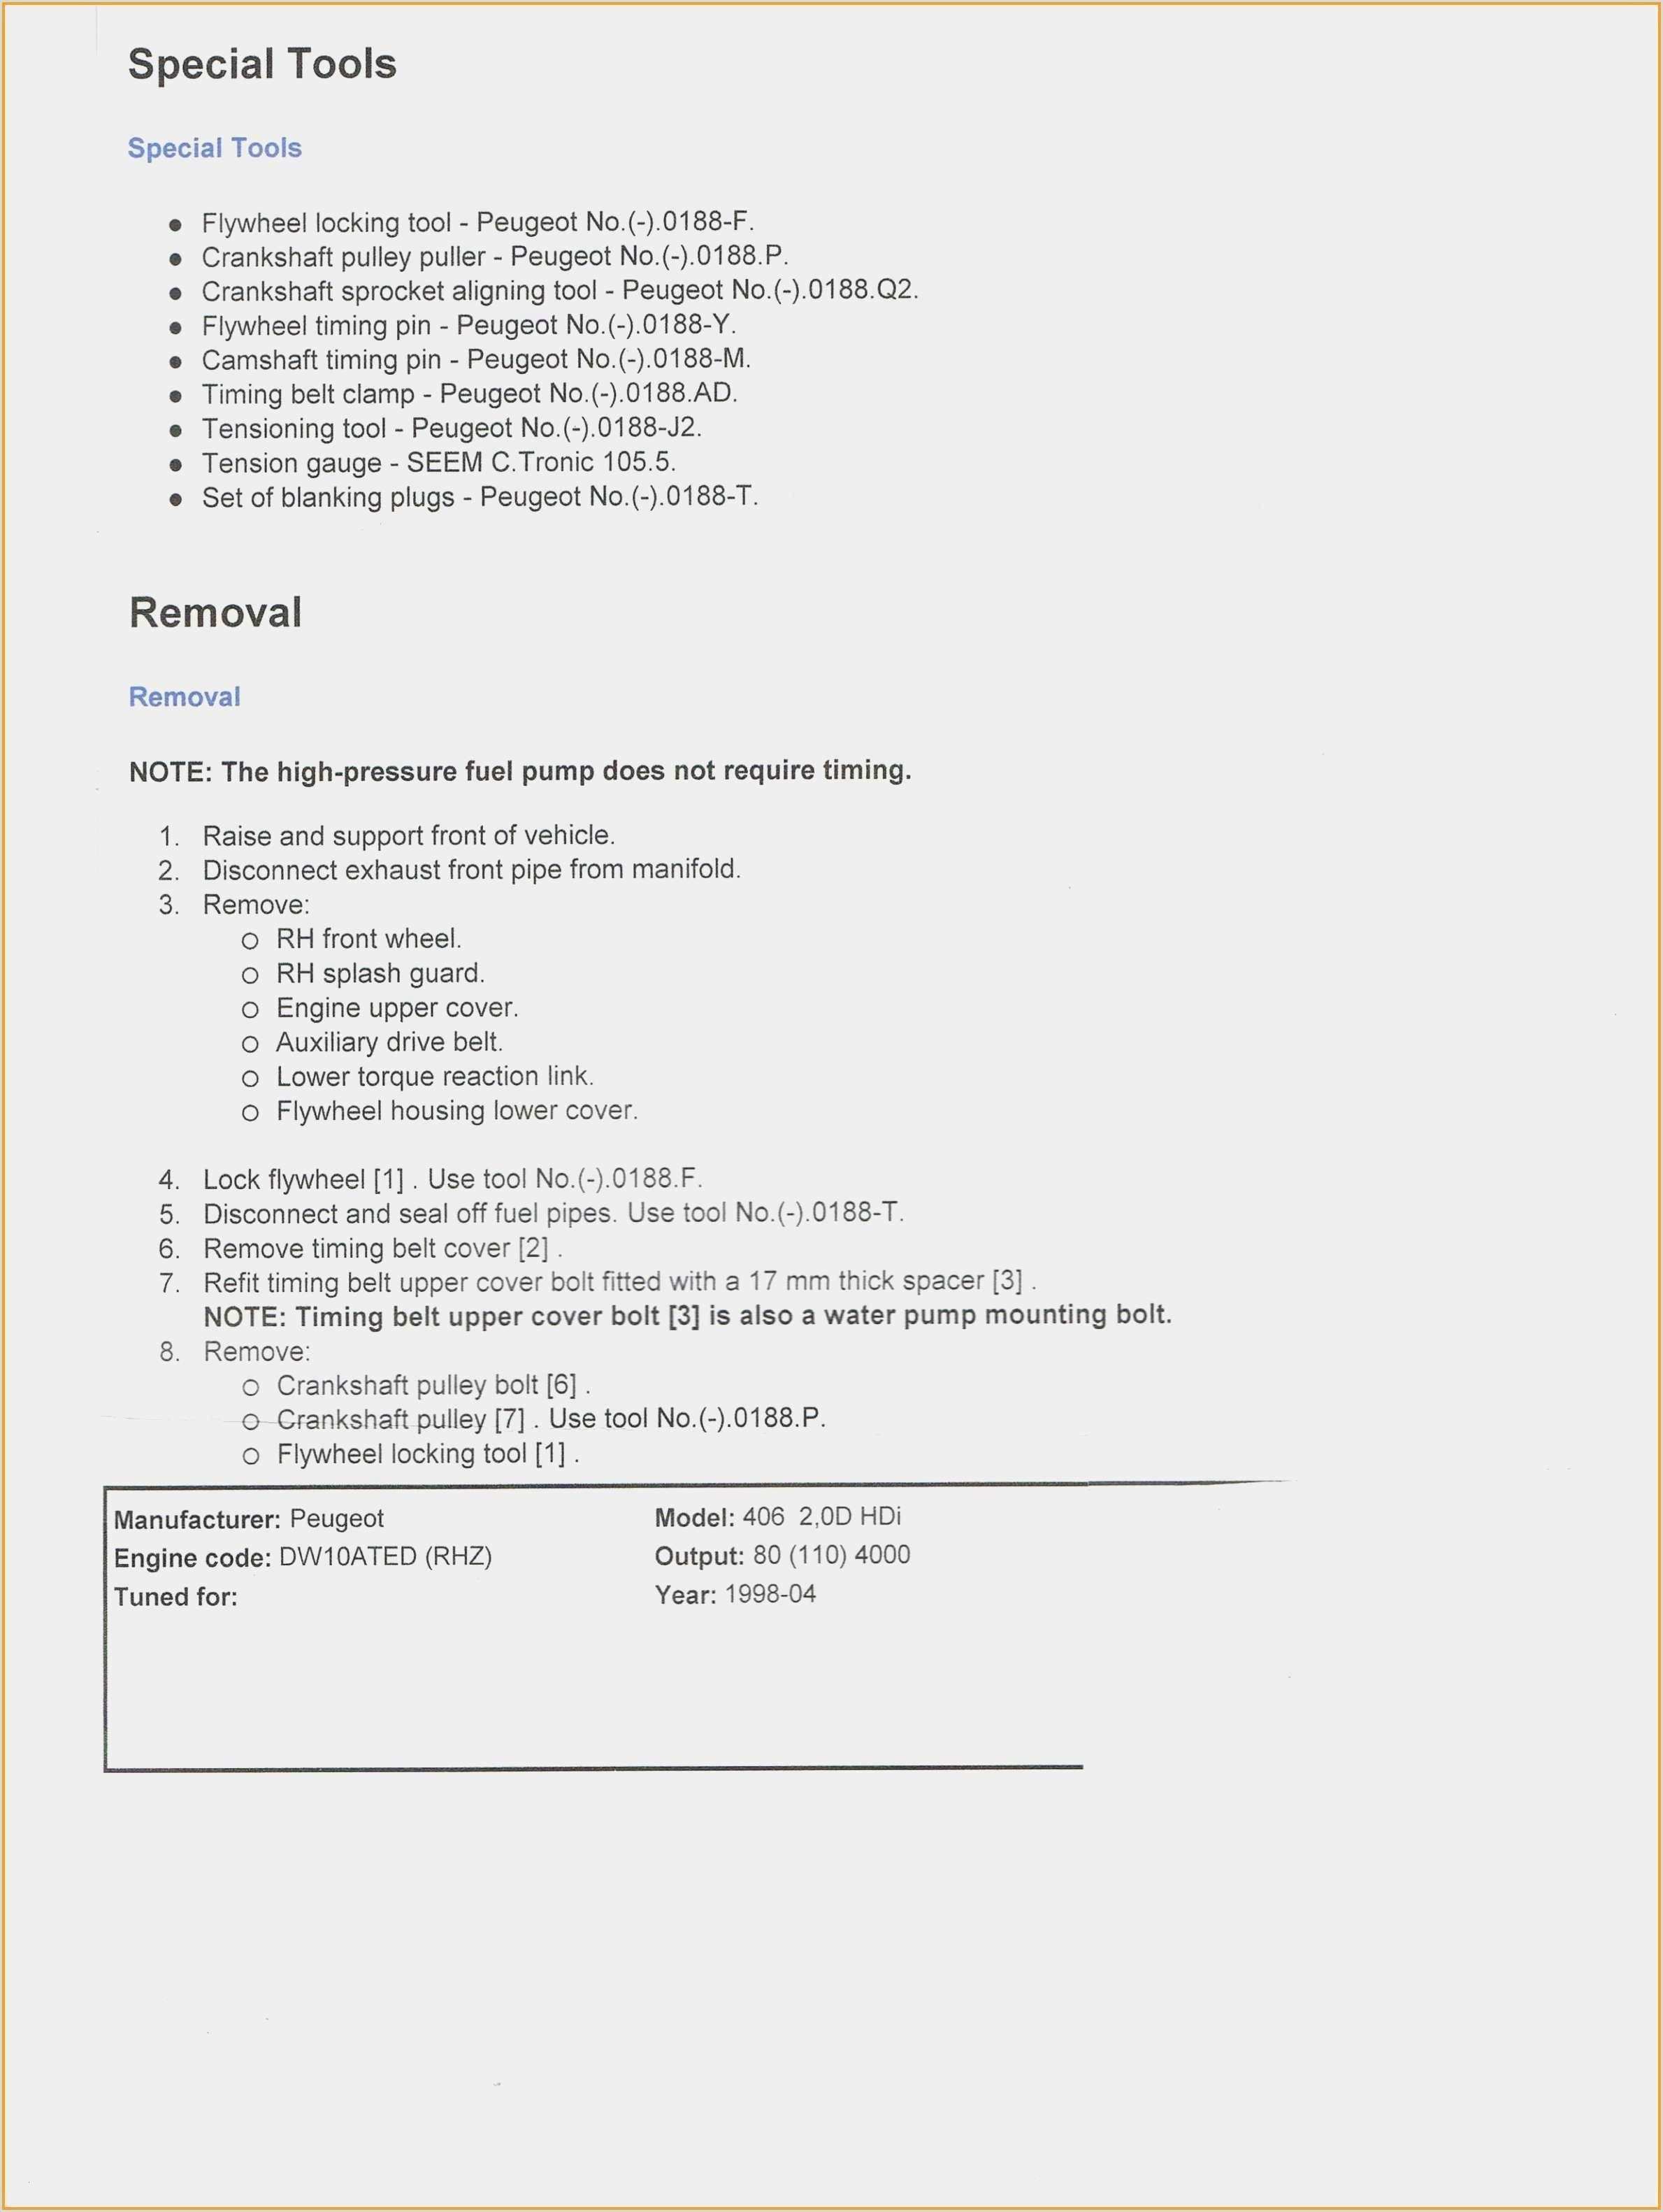 Lebenslauf Muster Design Kostenlos In 2020 Best Resume Template Project Manager Resume Cover Letter For Resume